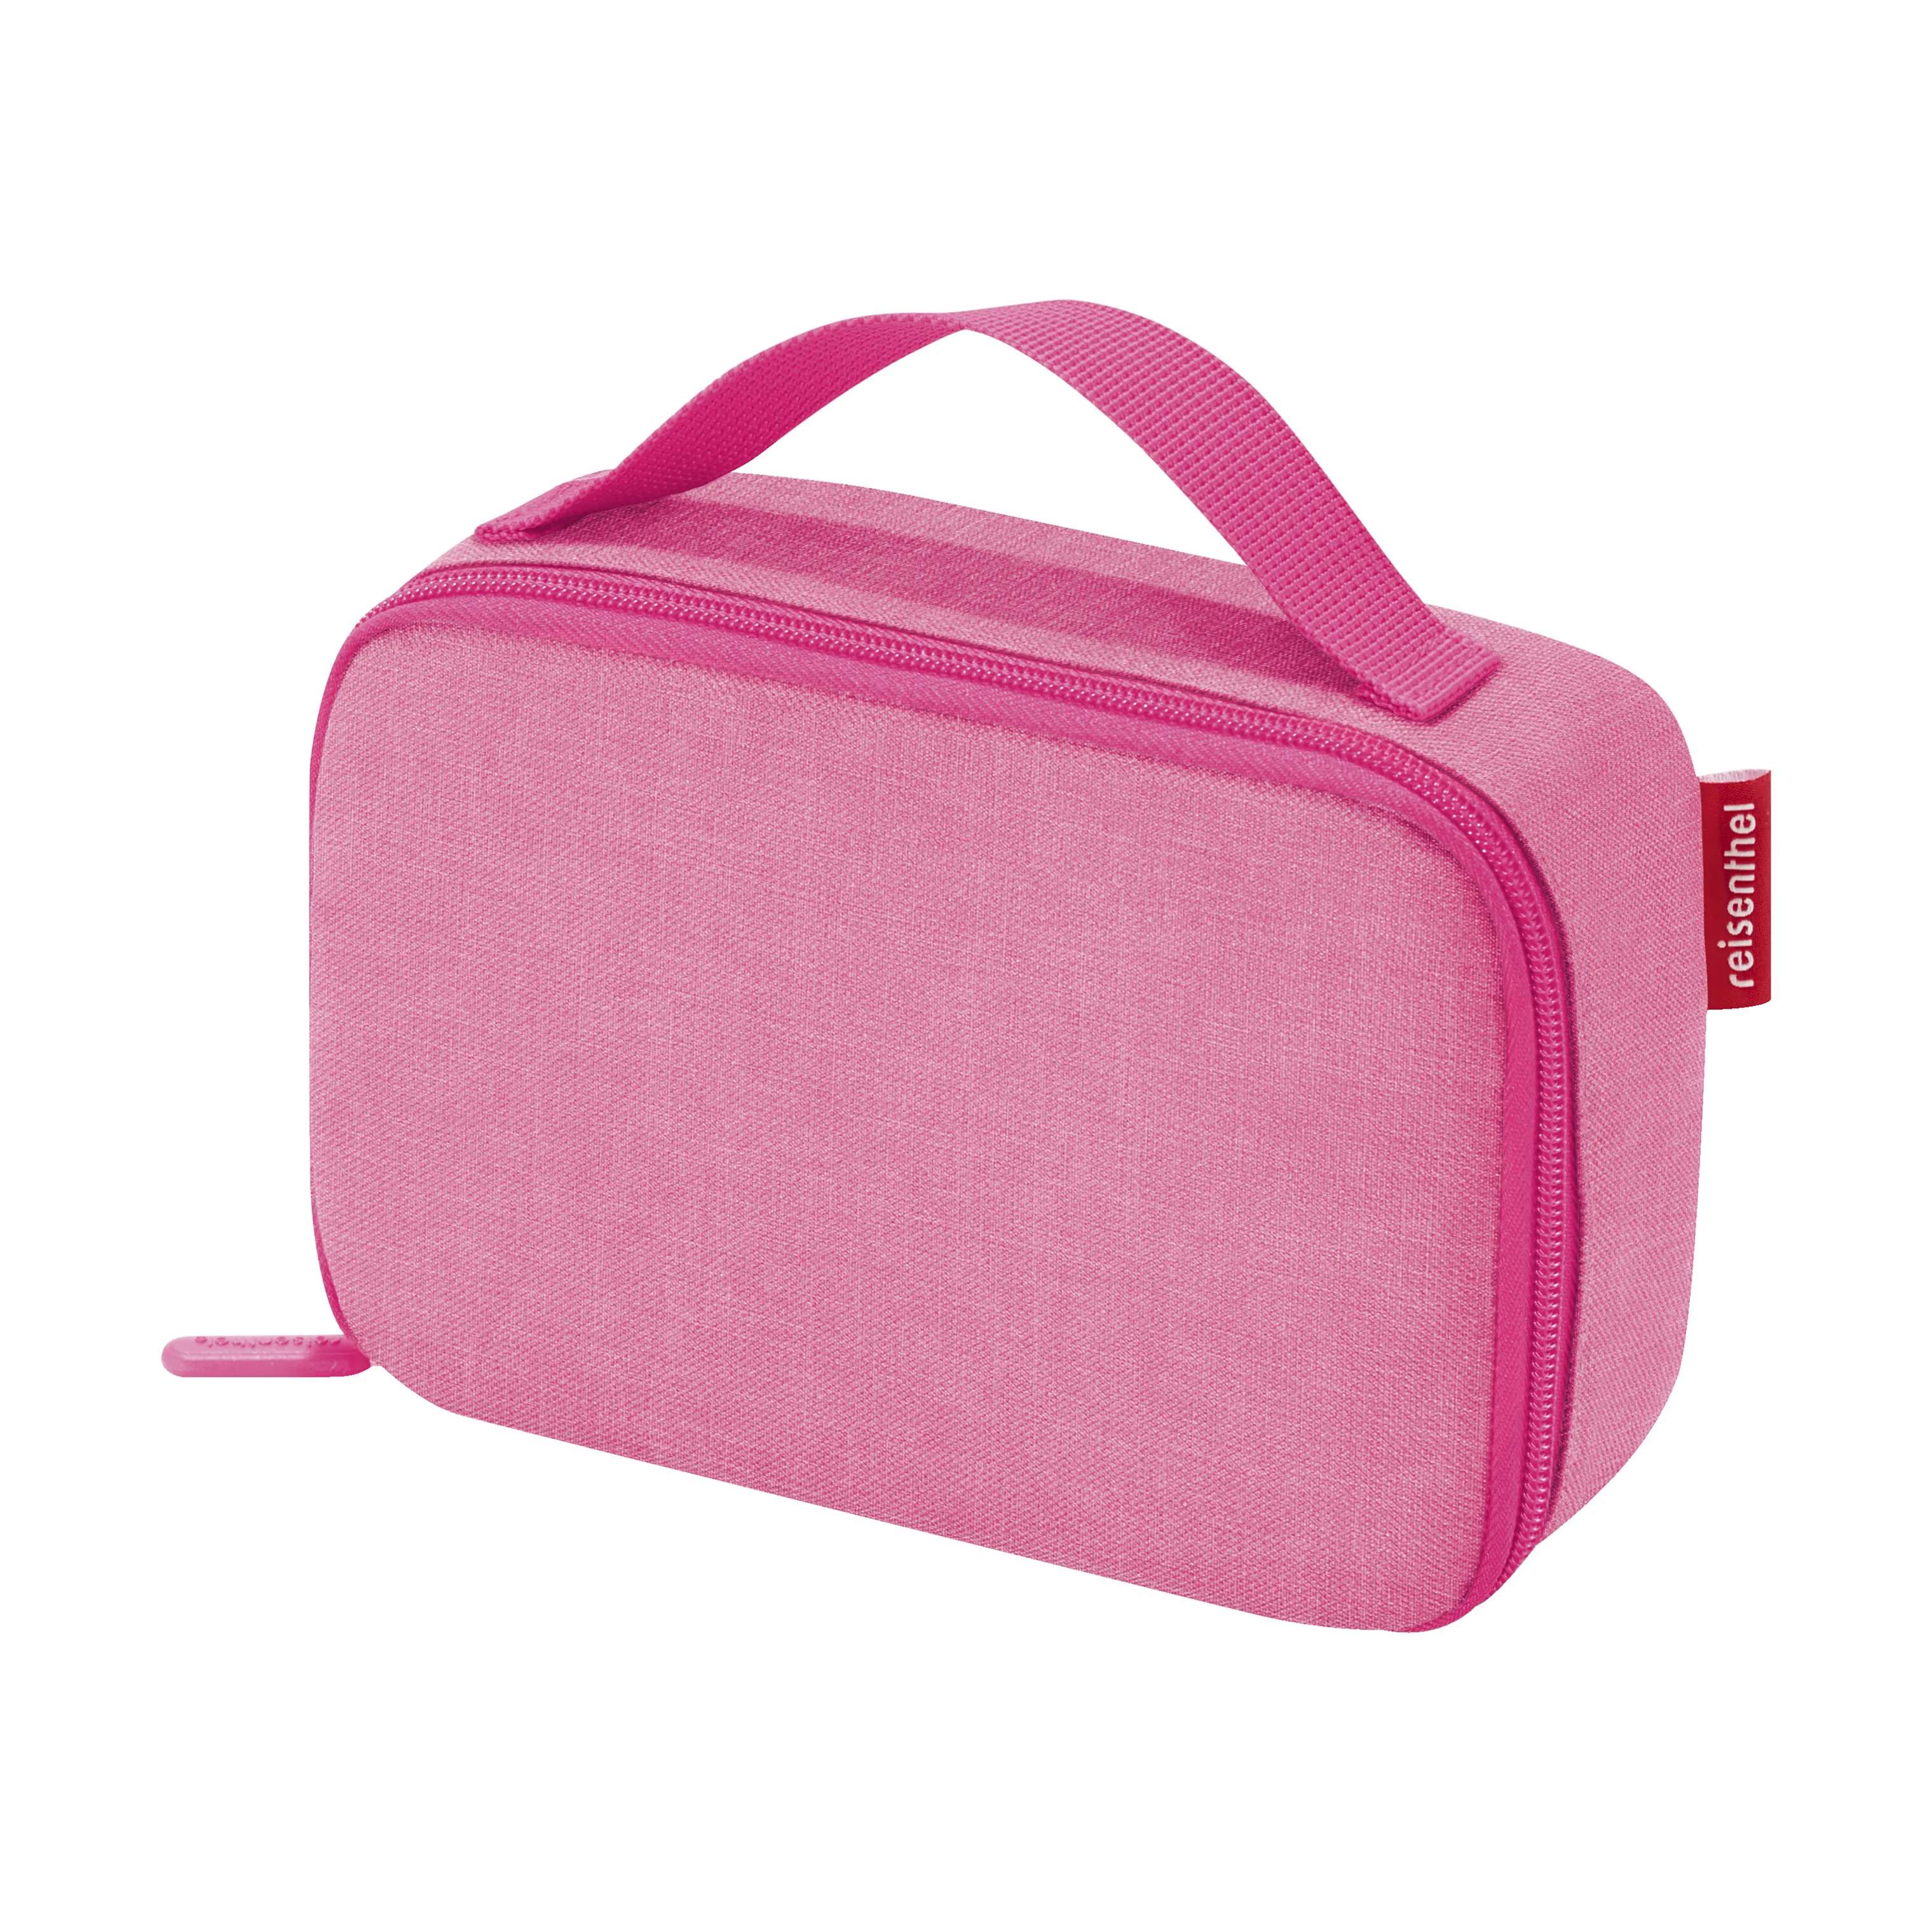 Thermocase, twist pink, large